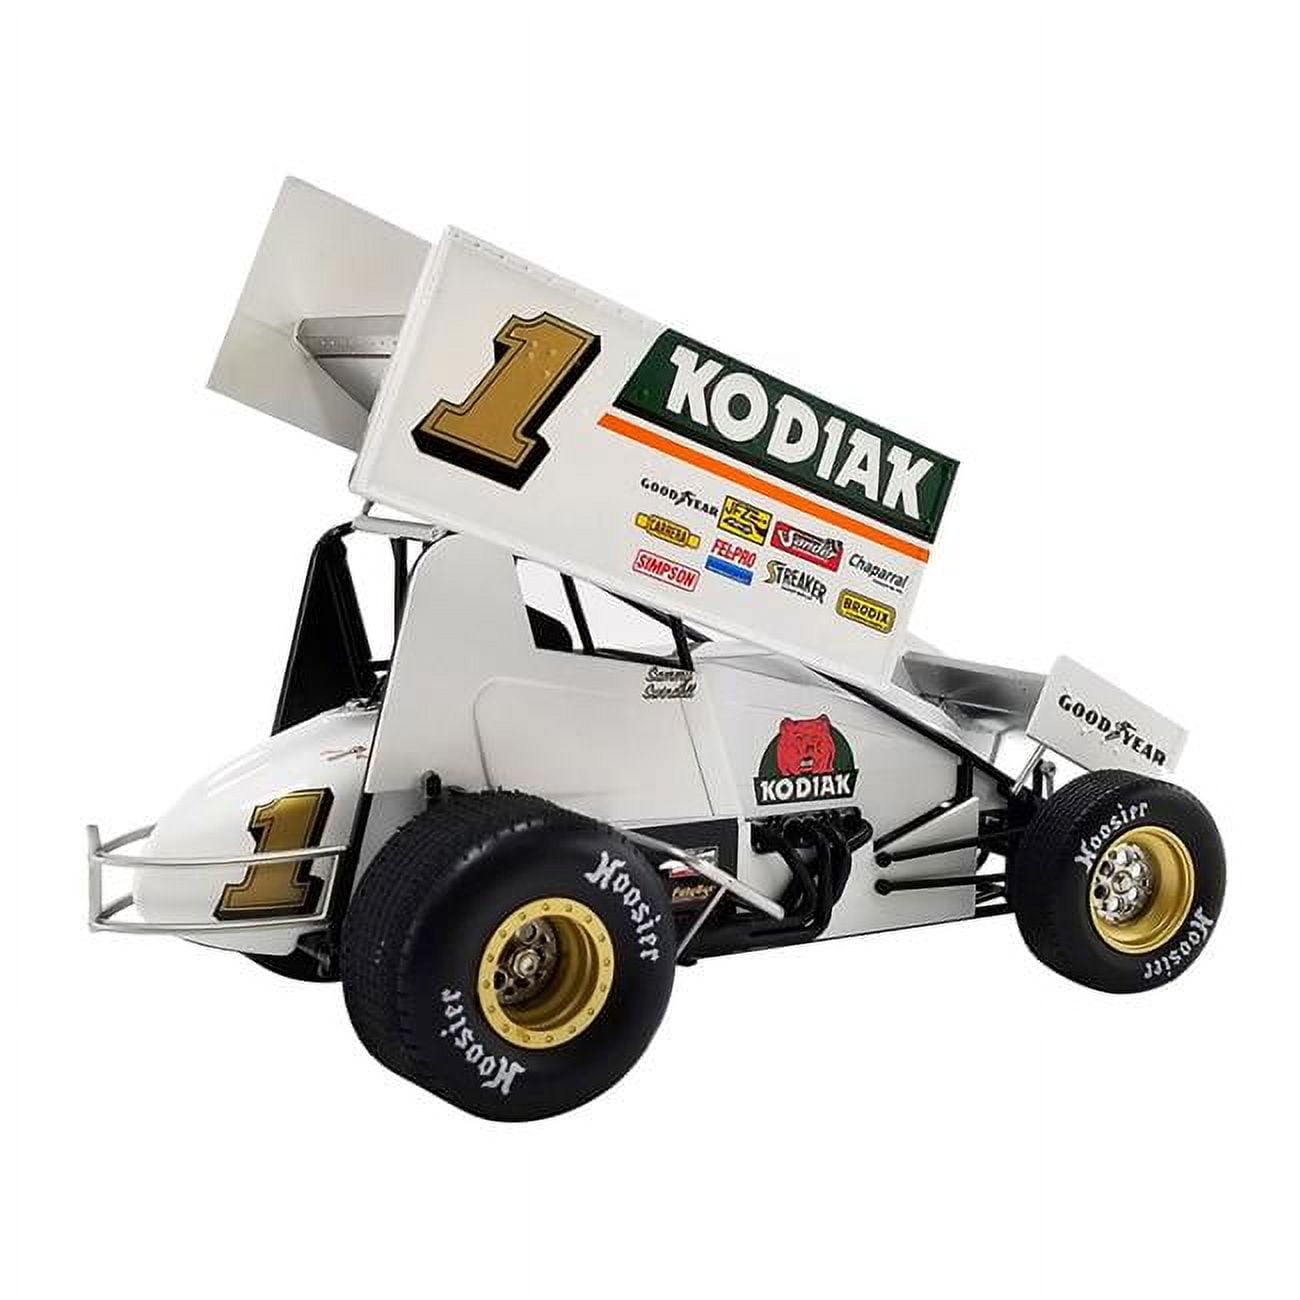 Picture of ACME A1809524 Winged Sprint Car No.1 Sammy Swindell Kodiak Special National Sprint Car Hall of Fame & Museum World of Outlaws 1 by 18 Scale Diecast Model Car